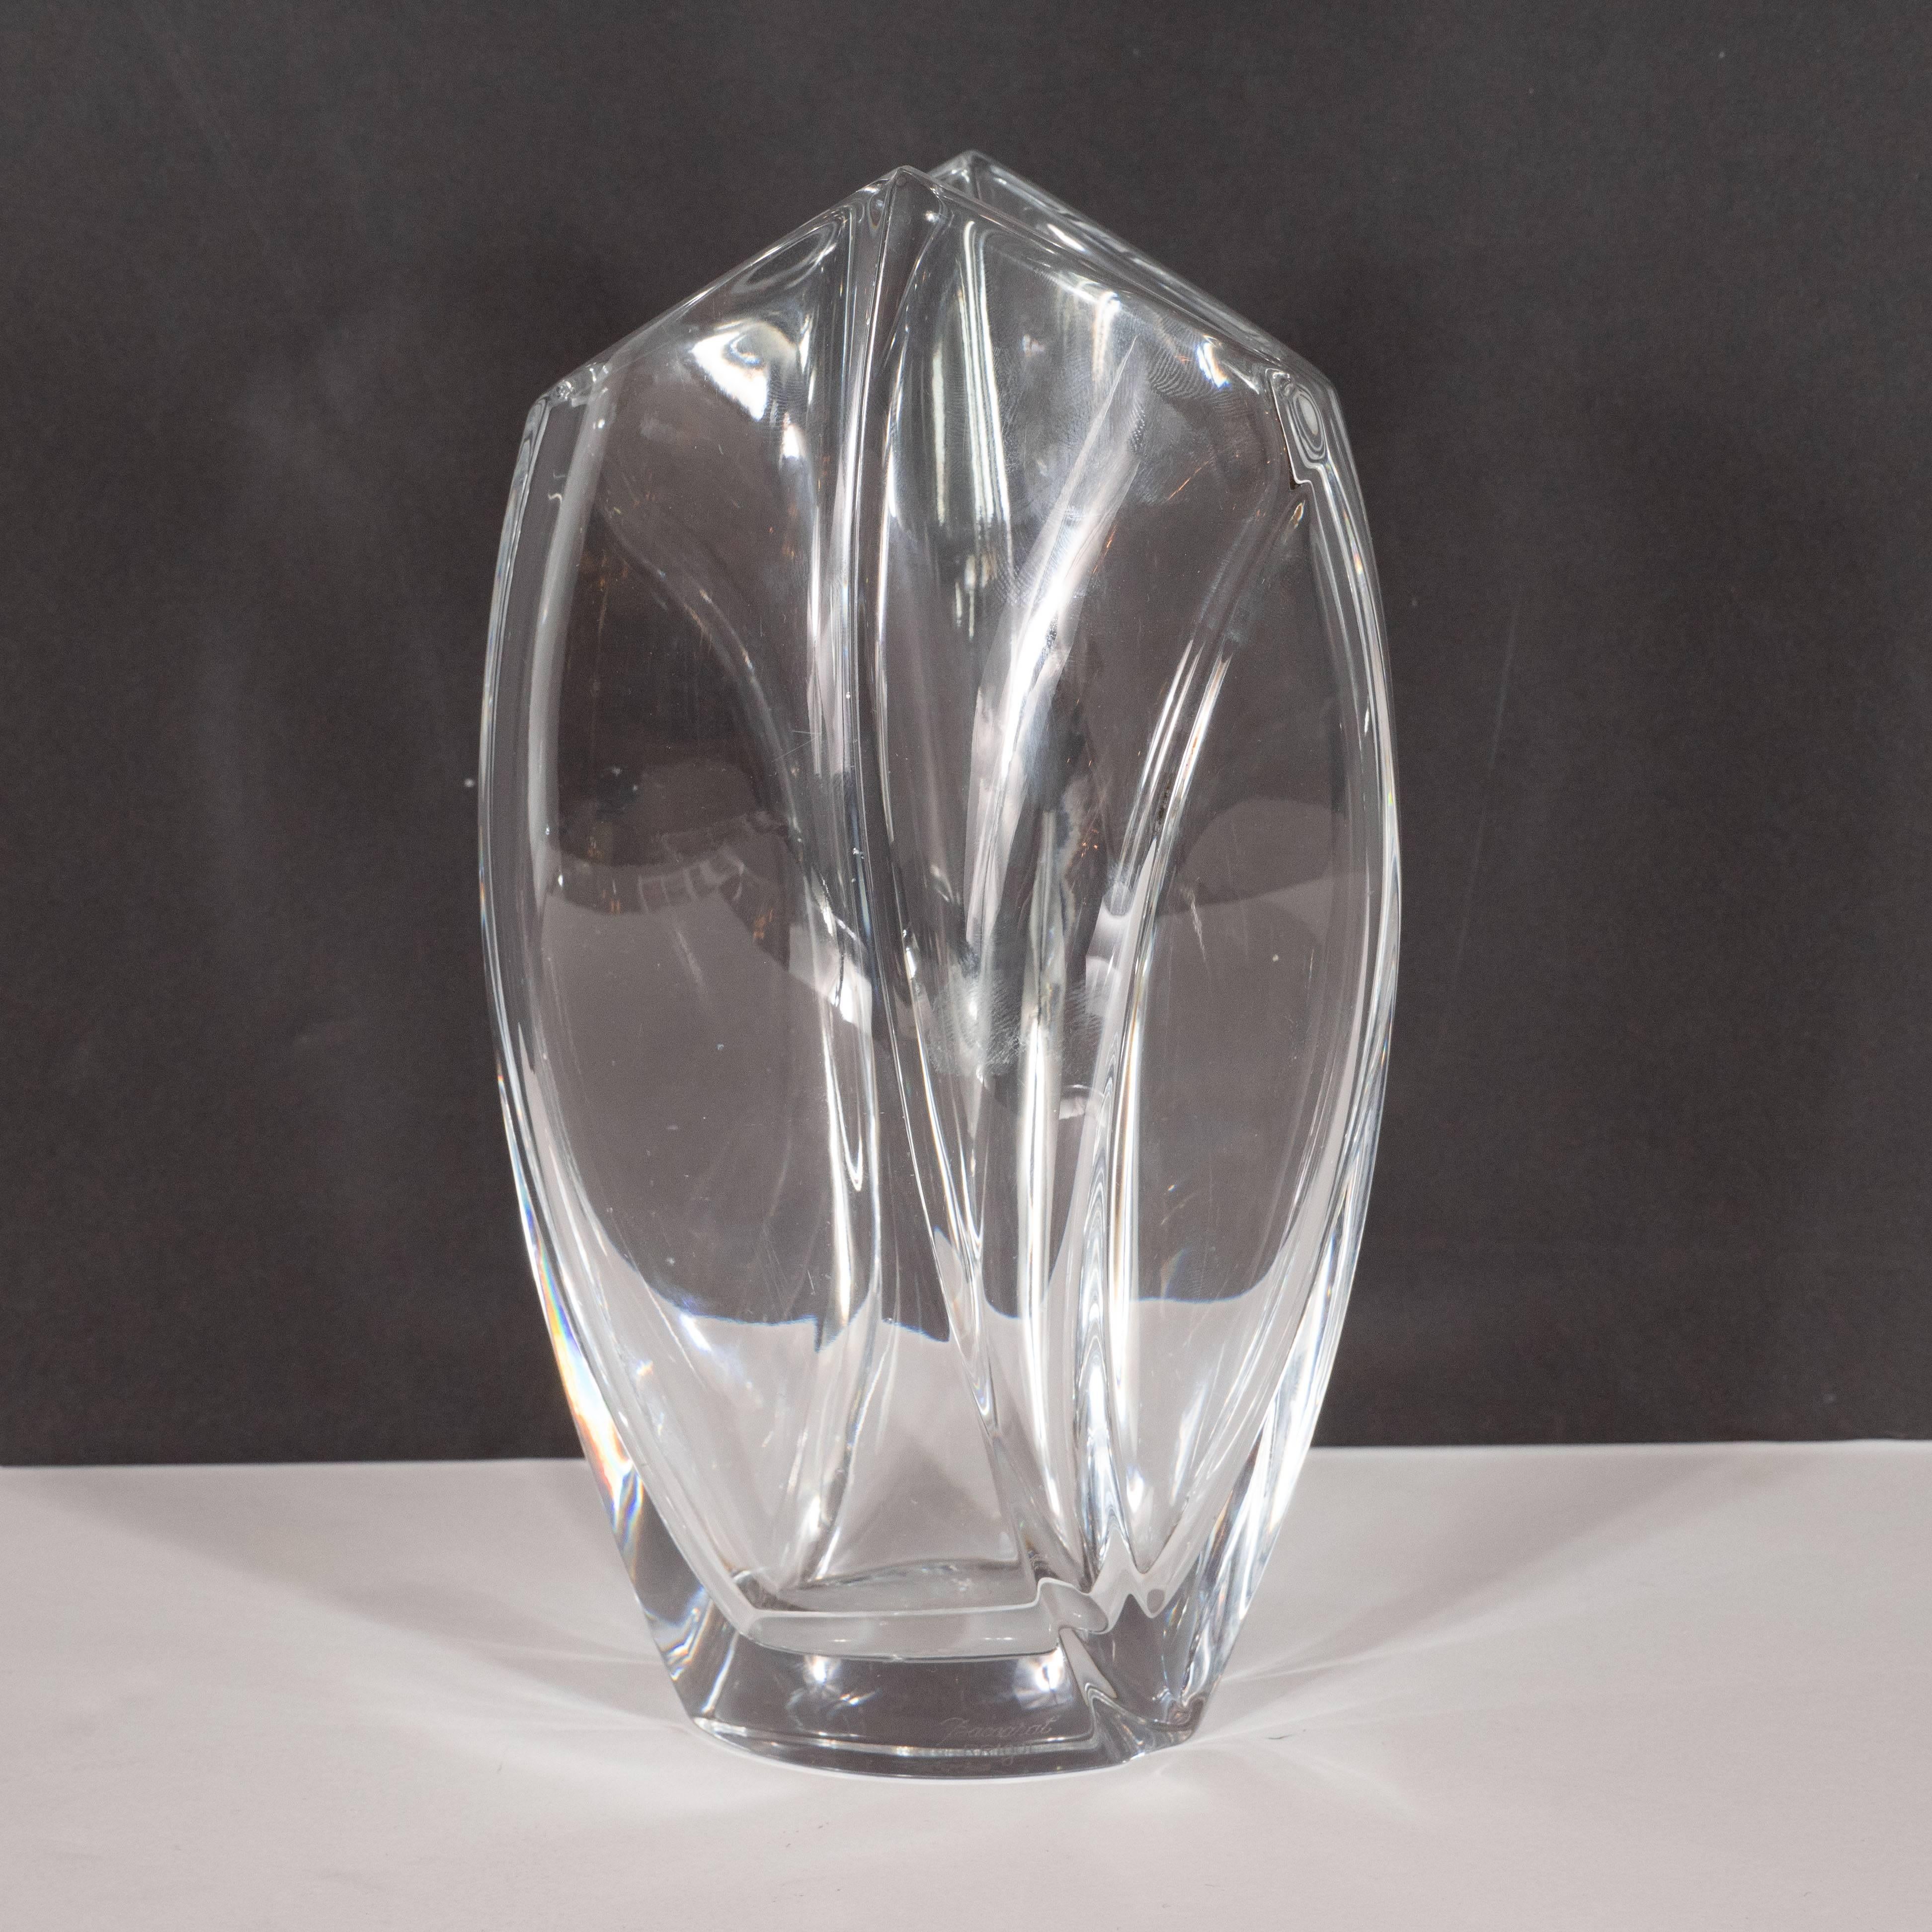 Late 20th Century Modernist Sculptural Translucent Crystal Vase by Robert Rigot for Baccarat